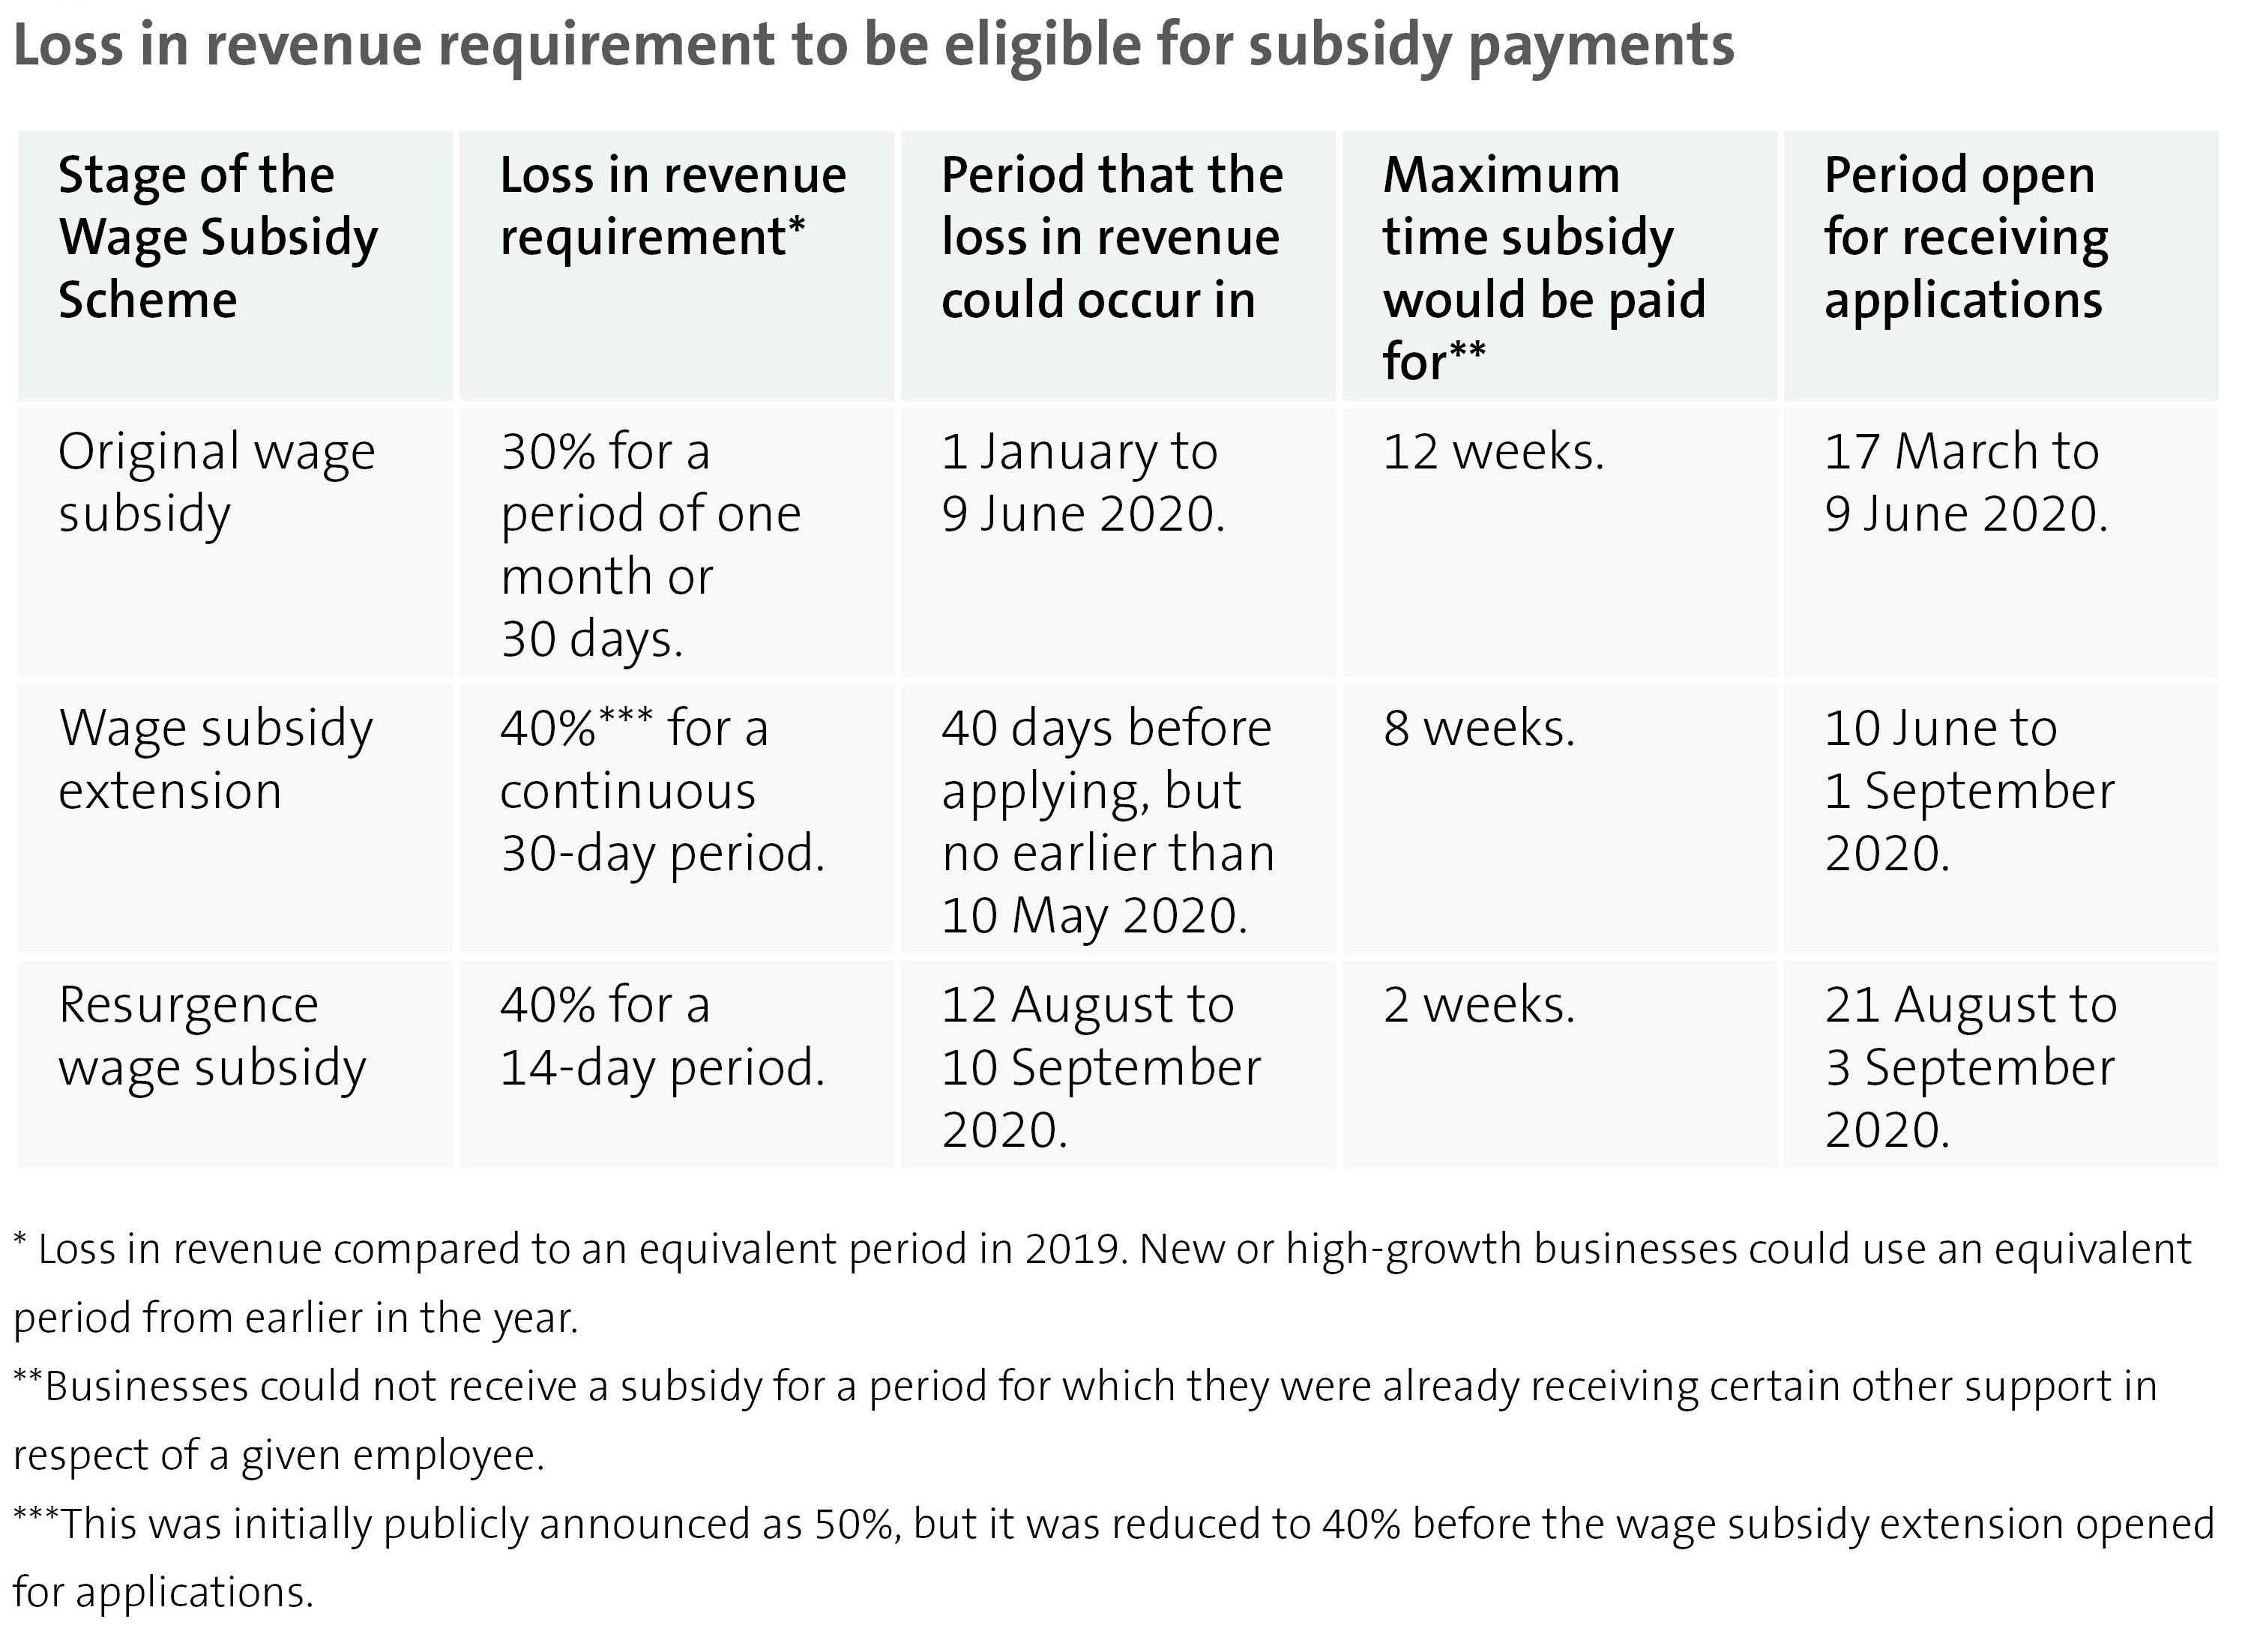 Figure 1 - Loss in revenue requirement to be eligible for subsidy payments